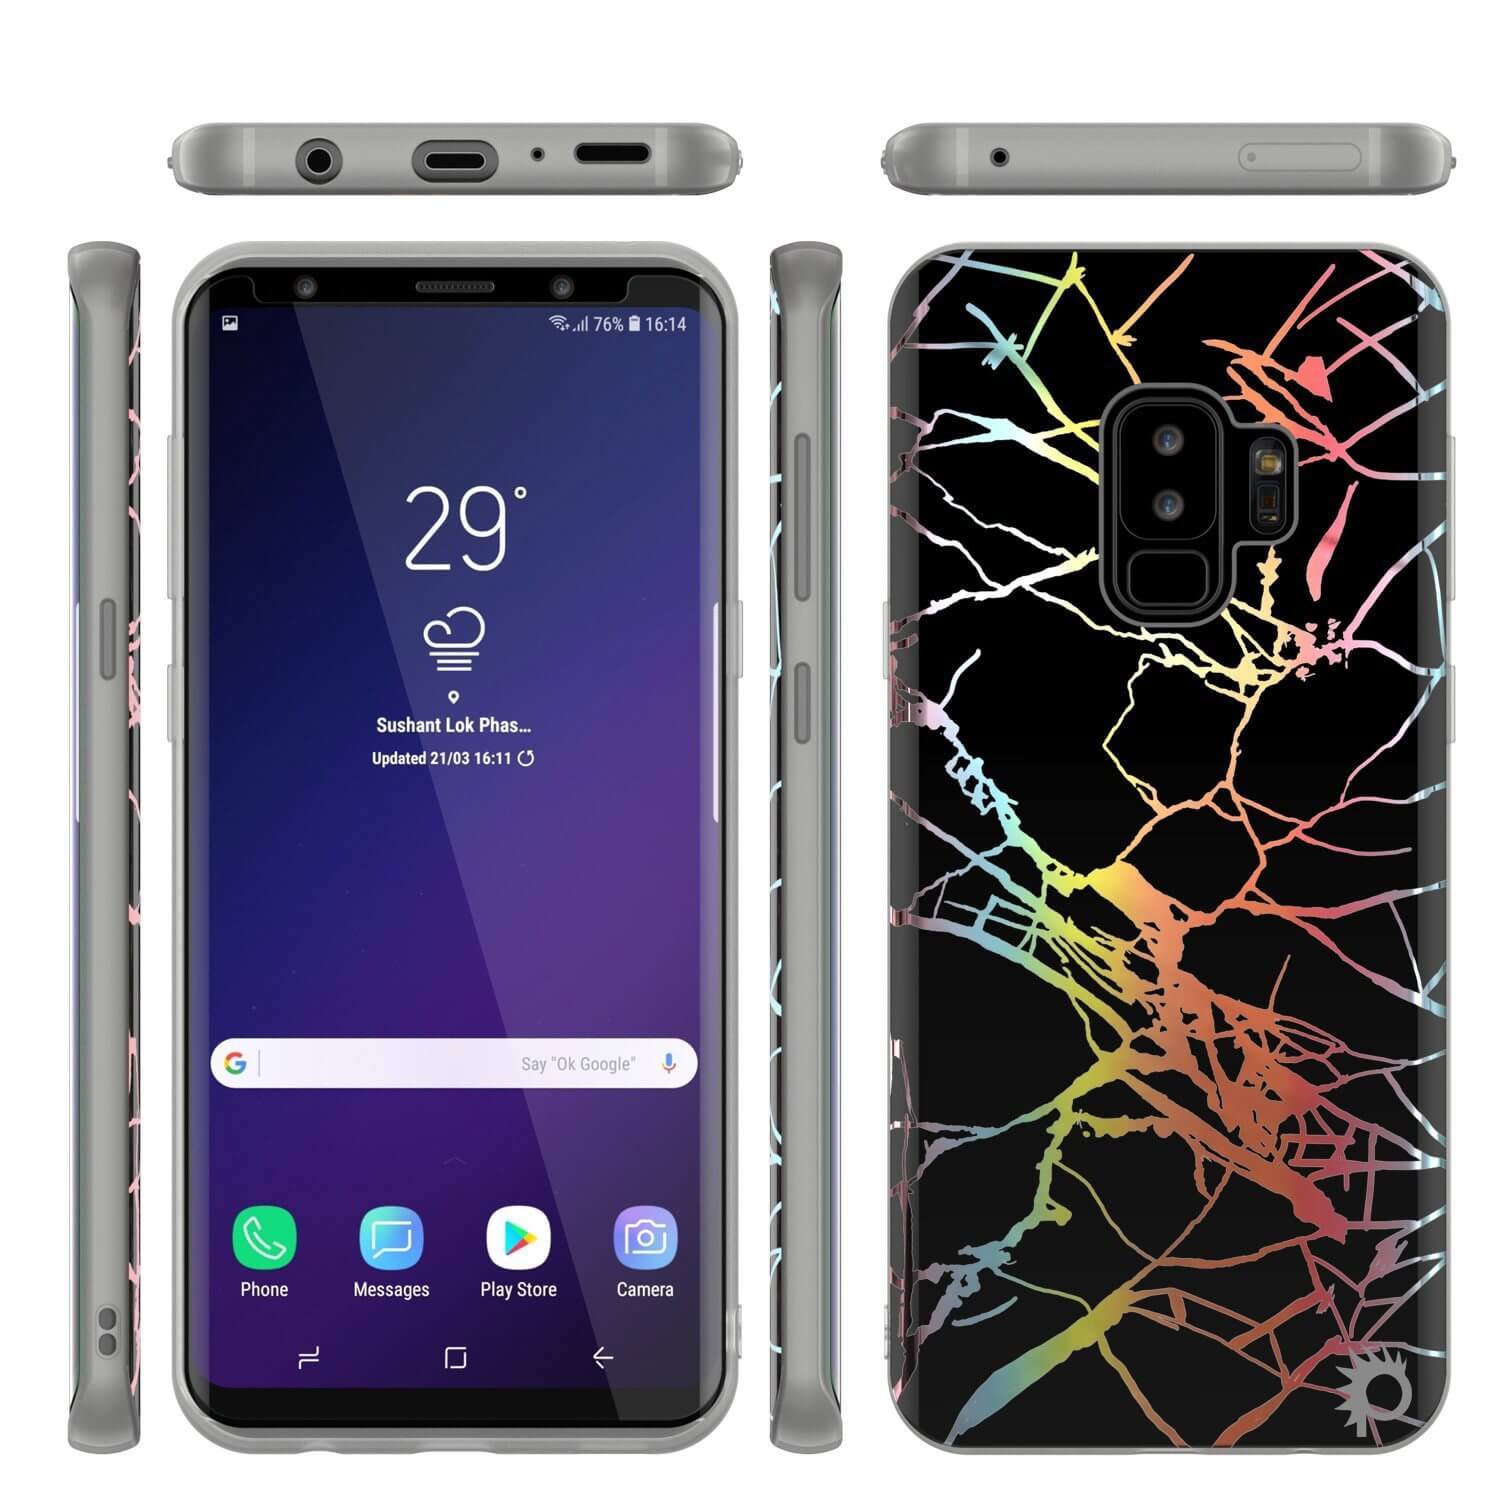 Punkcase Galaxy S9+ Marble Case, Protective Full Body Cover W/PunkShield Screen Protector (Black Mirage) - PunkCase NZ